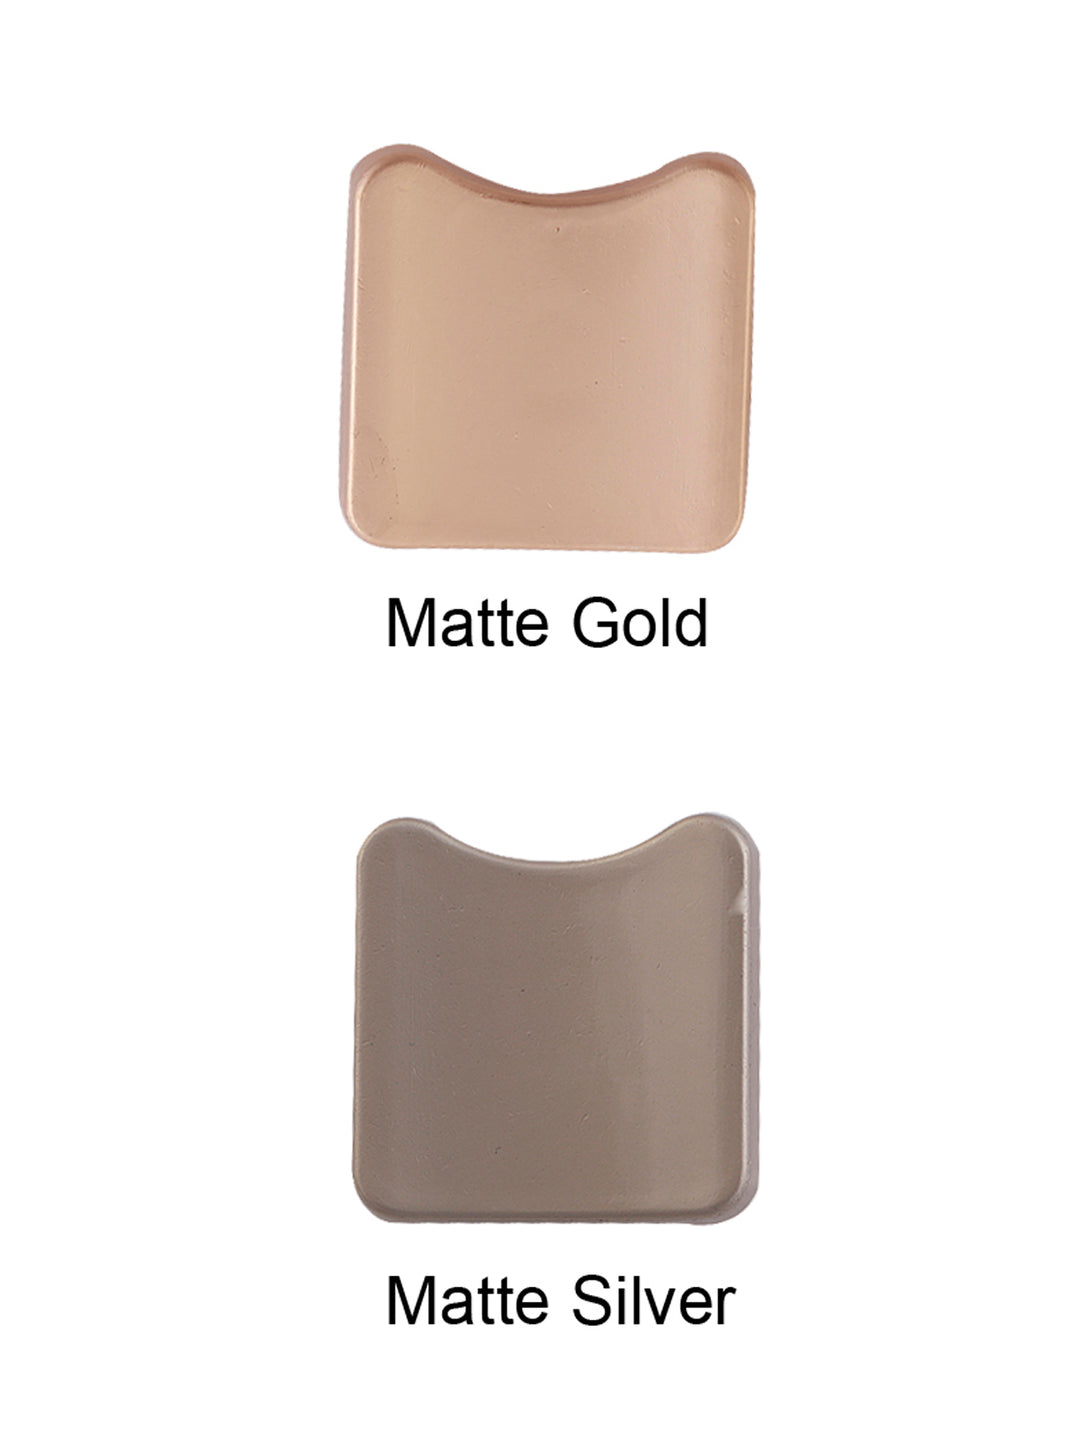 Square Shape Matte Finish Downhole Loop Shank Metal Button in Matte Gold/Silver Color